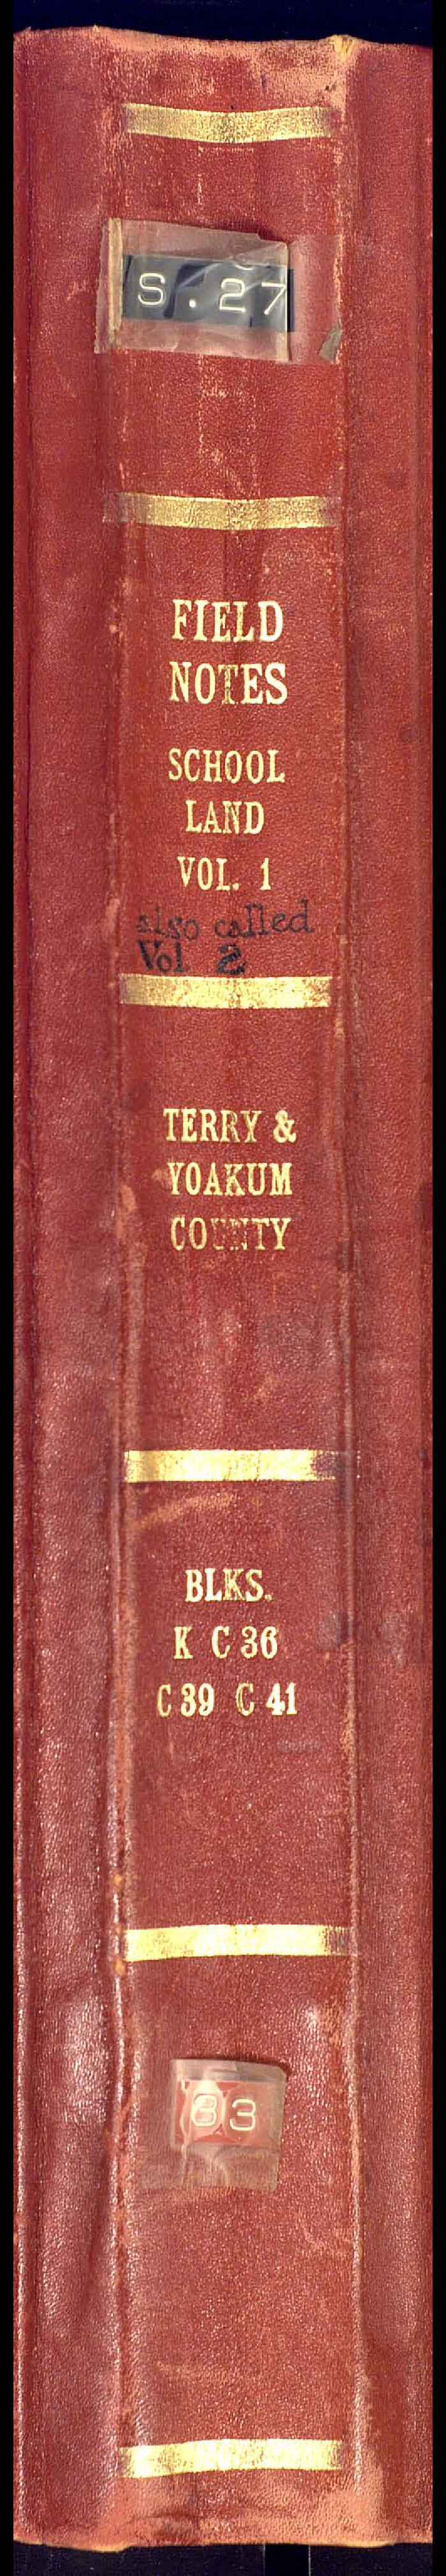 81674, PSL Field Notes for Blocks C36 and C37 in Gaines and Terry Counties, Block C38 in Dawson, Gaines, and Terry Counties, Blocks C39 and C41 in Dawson and Terry Counties, Block K in Yoakum and Terry Counties, General Map Collection